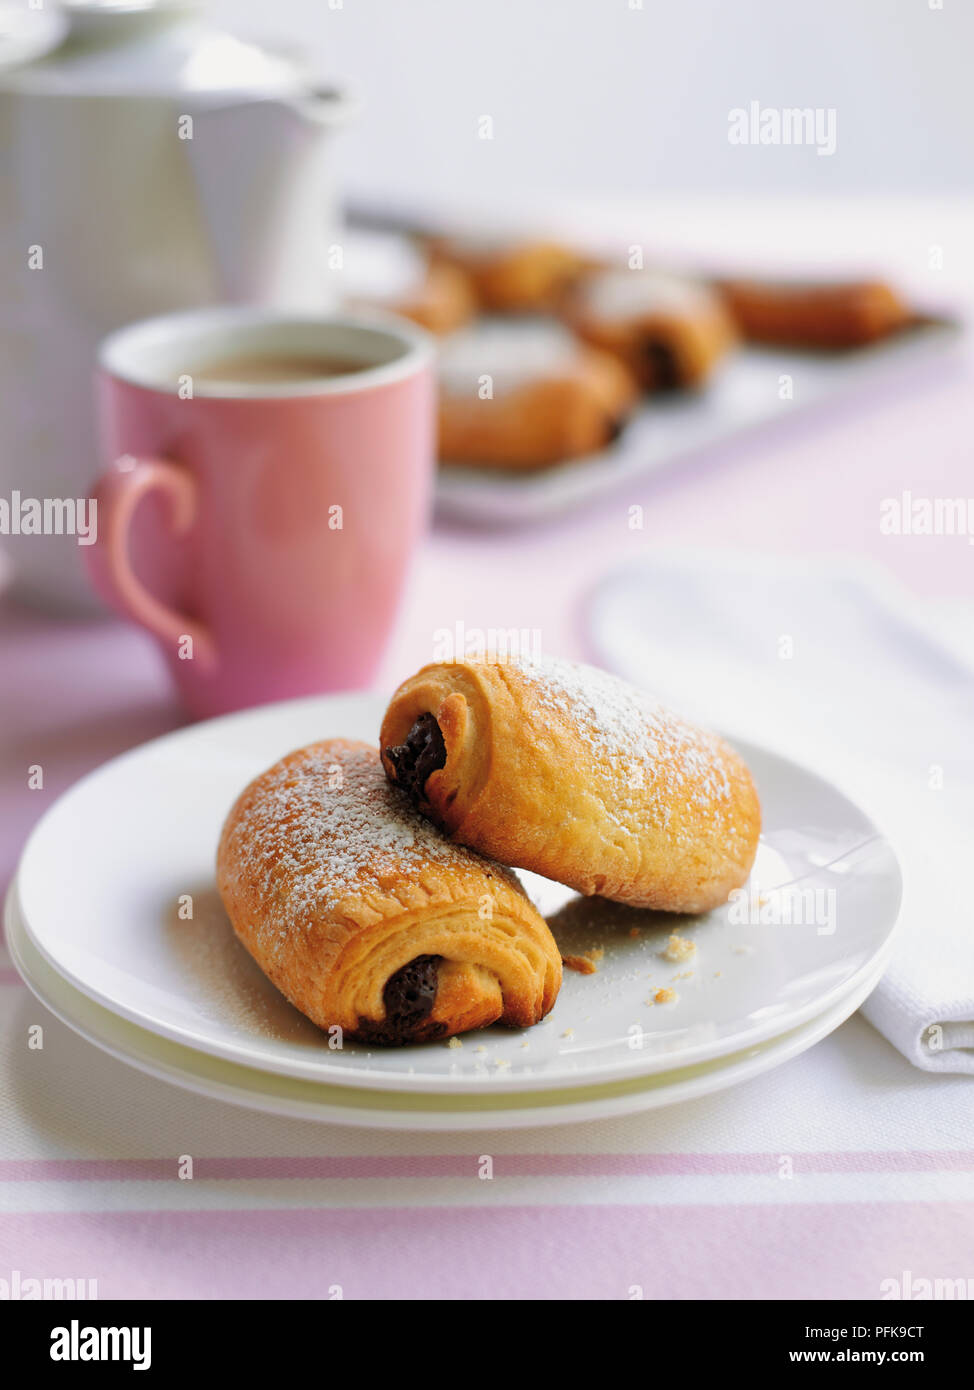 Two pain au chocolat on plates, a mug, coffee pot, and pain au chocolate in background Stock Photo